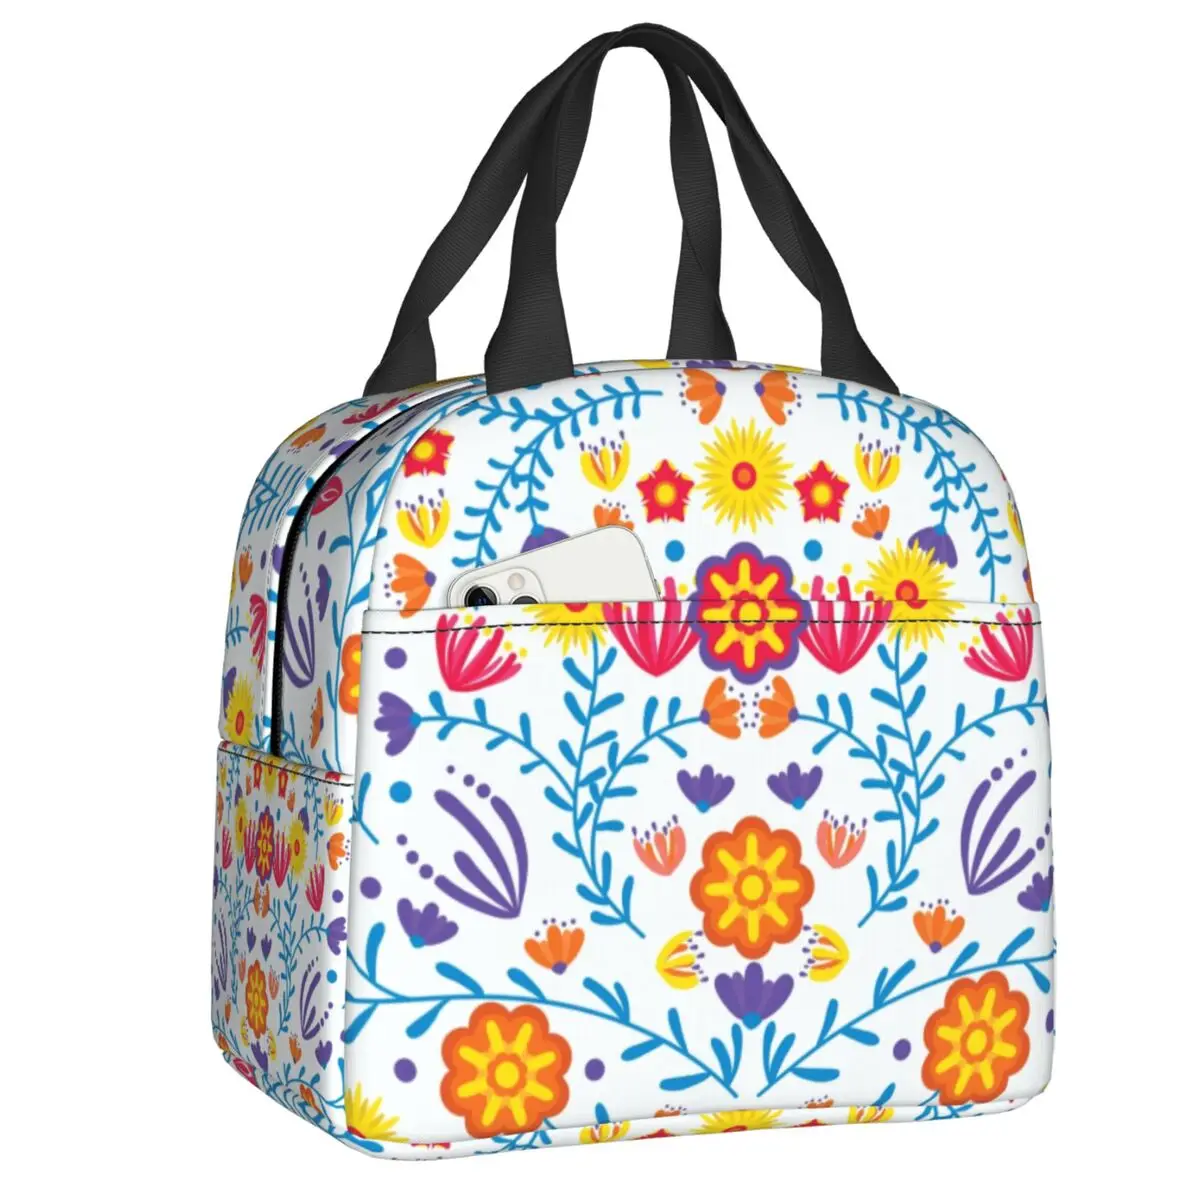 Colorful Mexican Flowers Insulated Lunch Bag Resuable Folk Floral Textile Art Cooler Thermal Lunch Tote Beach Camping Travel